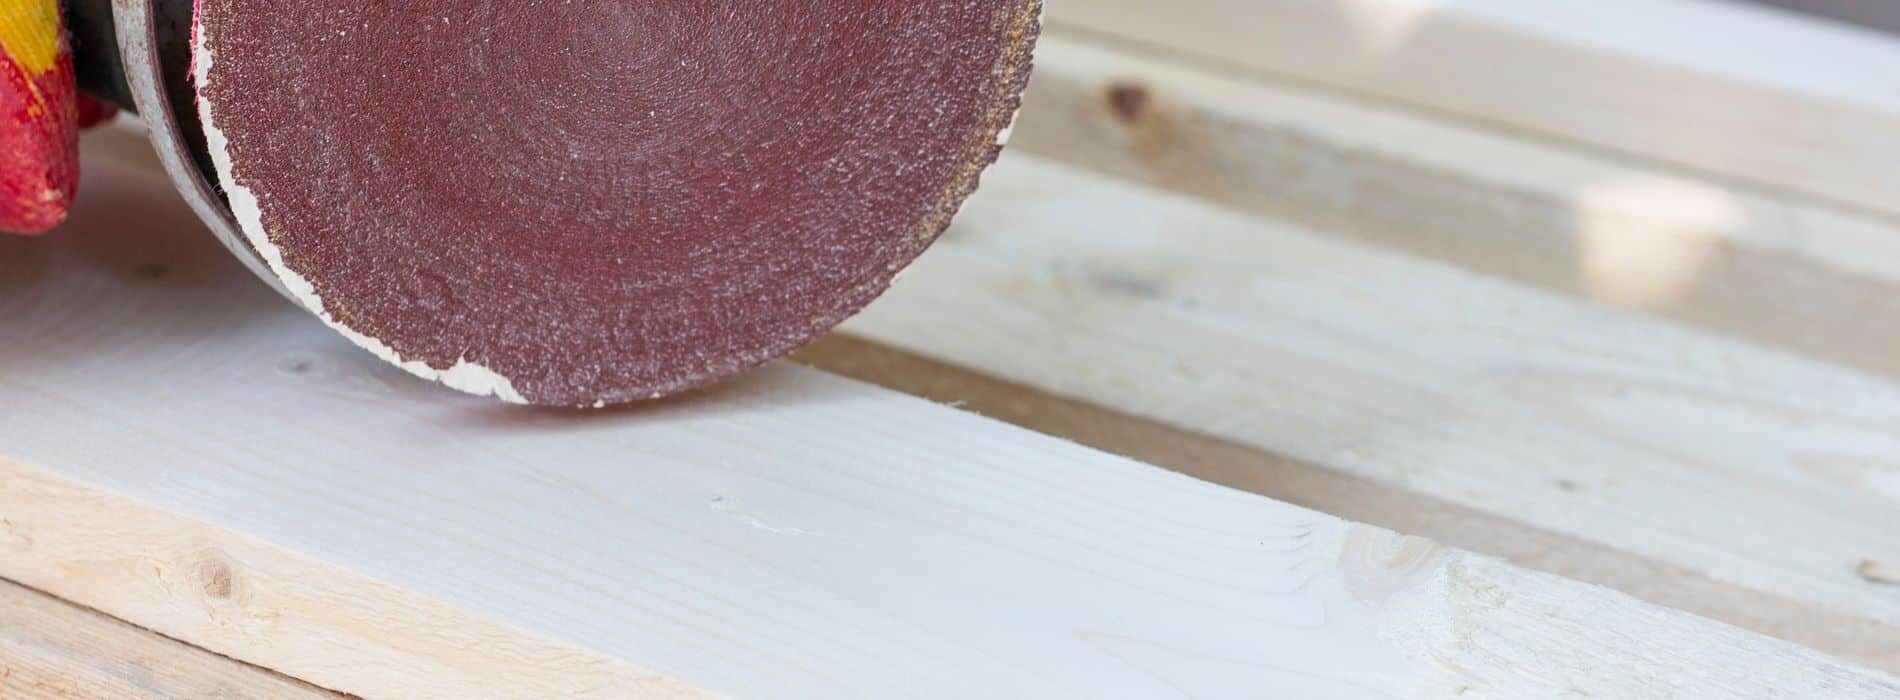 In Wimbledon, a 125mm diameter alioxide sanding disc is employed to effectively remove old stains and deeply ingrained paint from wooden floors.